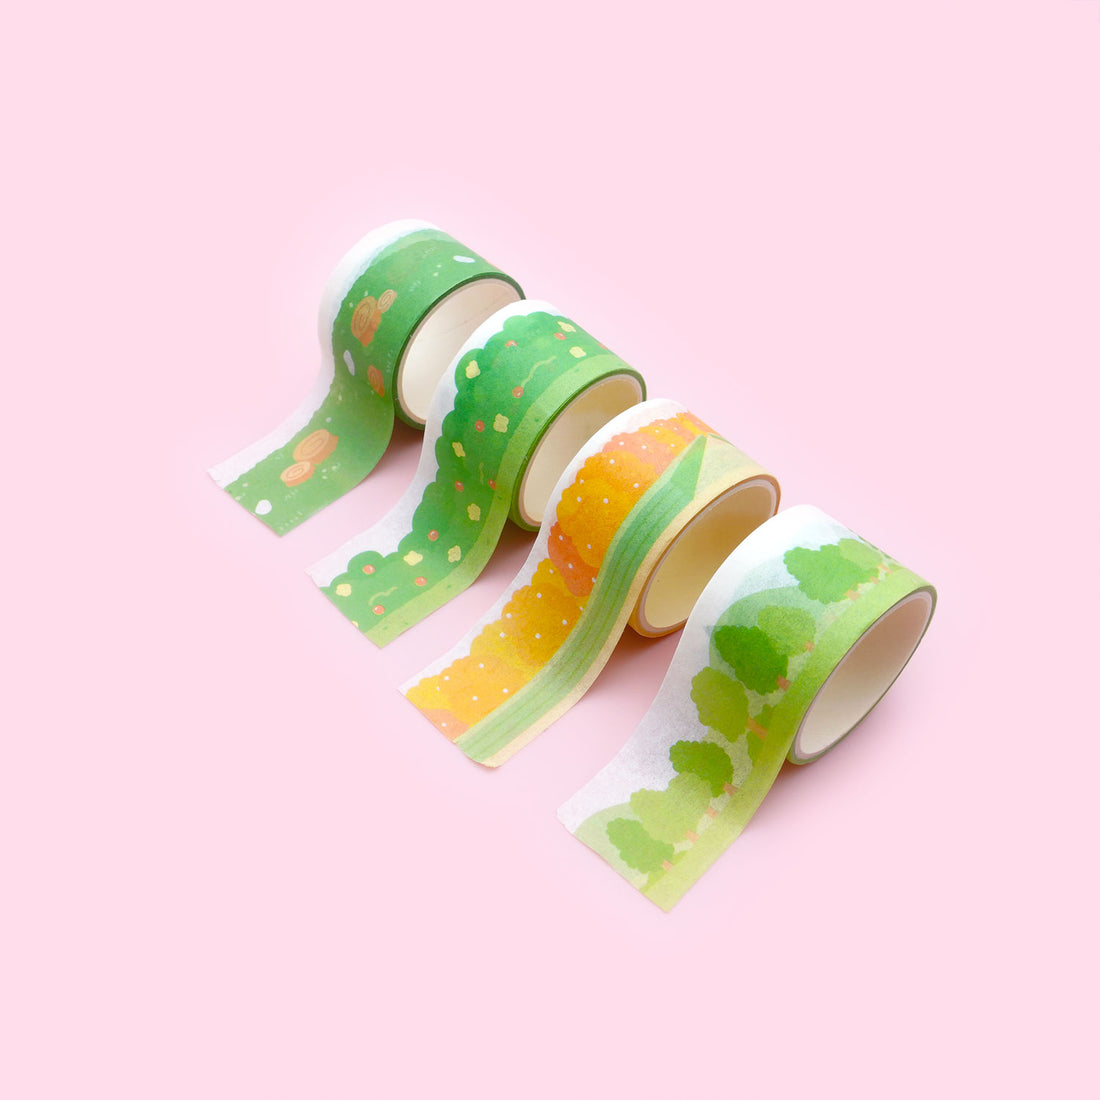 MPOPUUL 26 Rolls Vintage Washi Tape Set - Decorative Craft Tape  Sailing,Navigation,Maps,Galaxies,Hot air Balloon,Adhesive Wide Tape for  Journaling